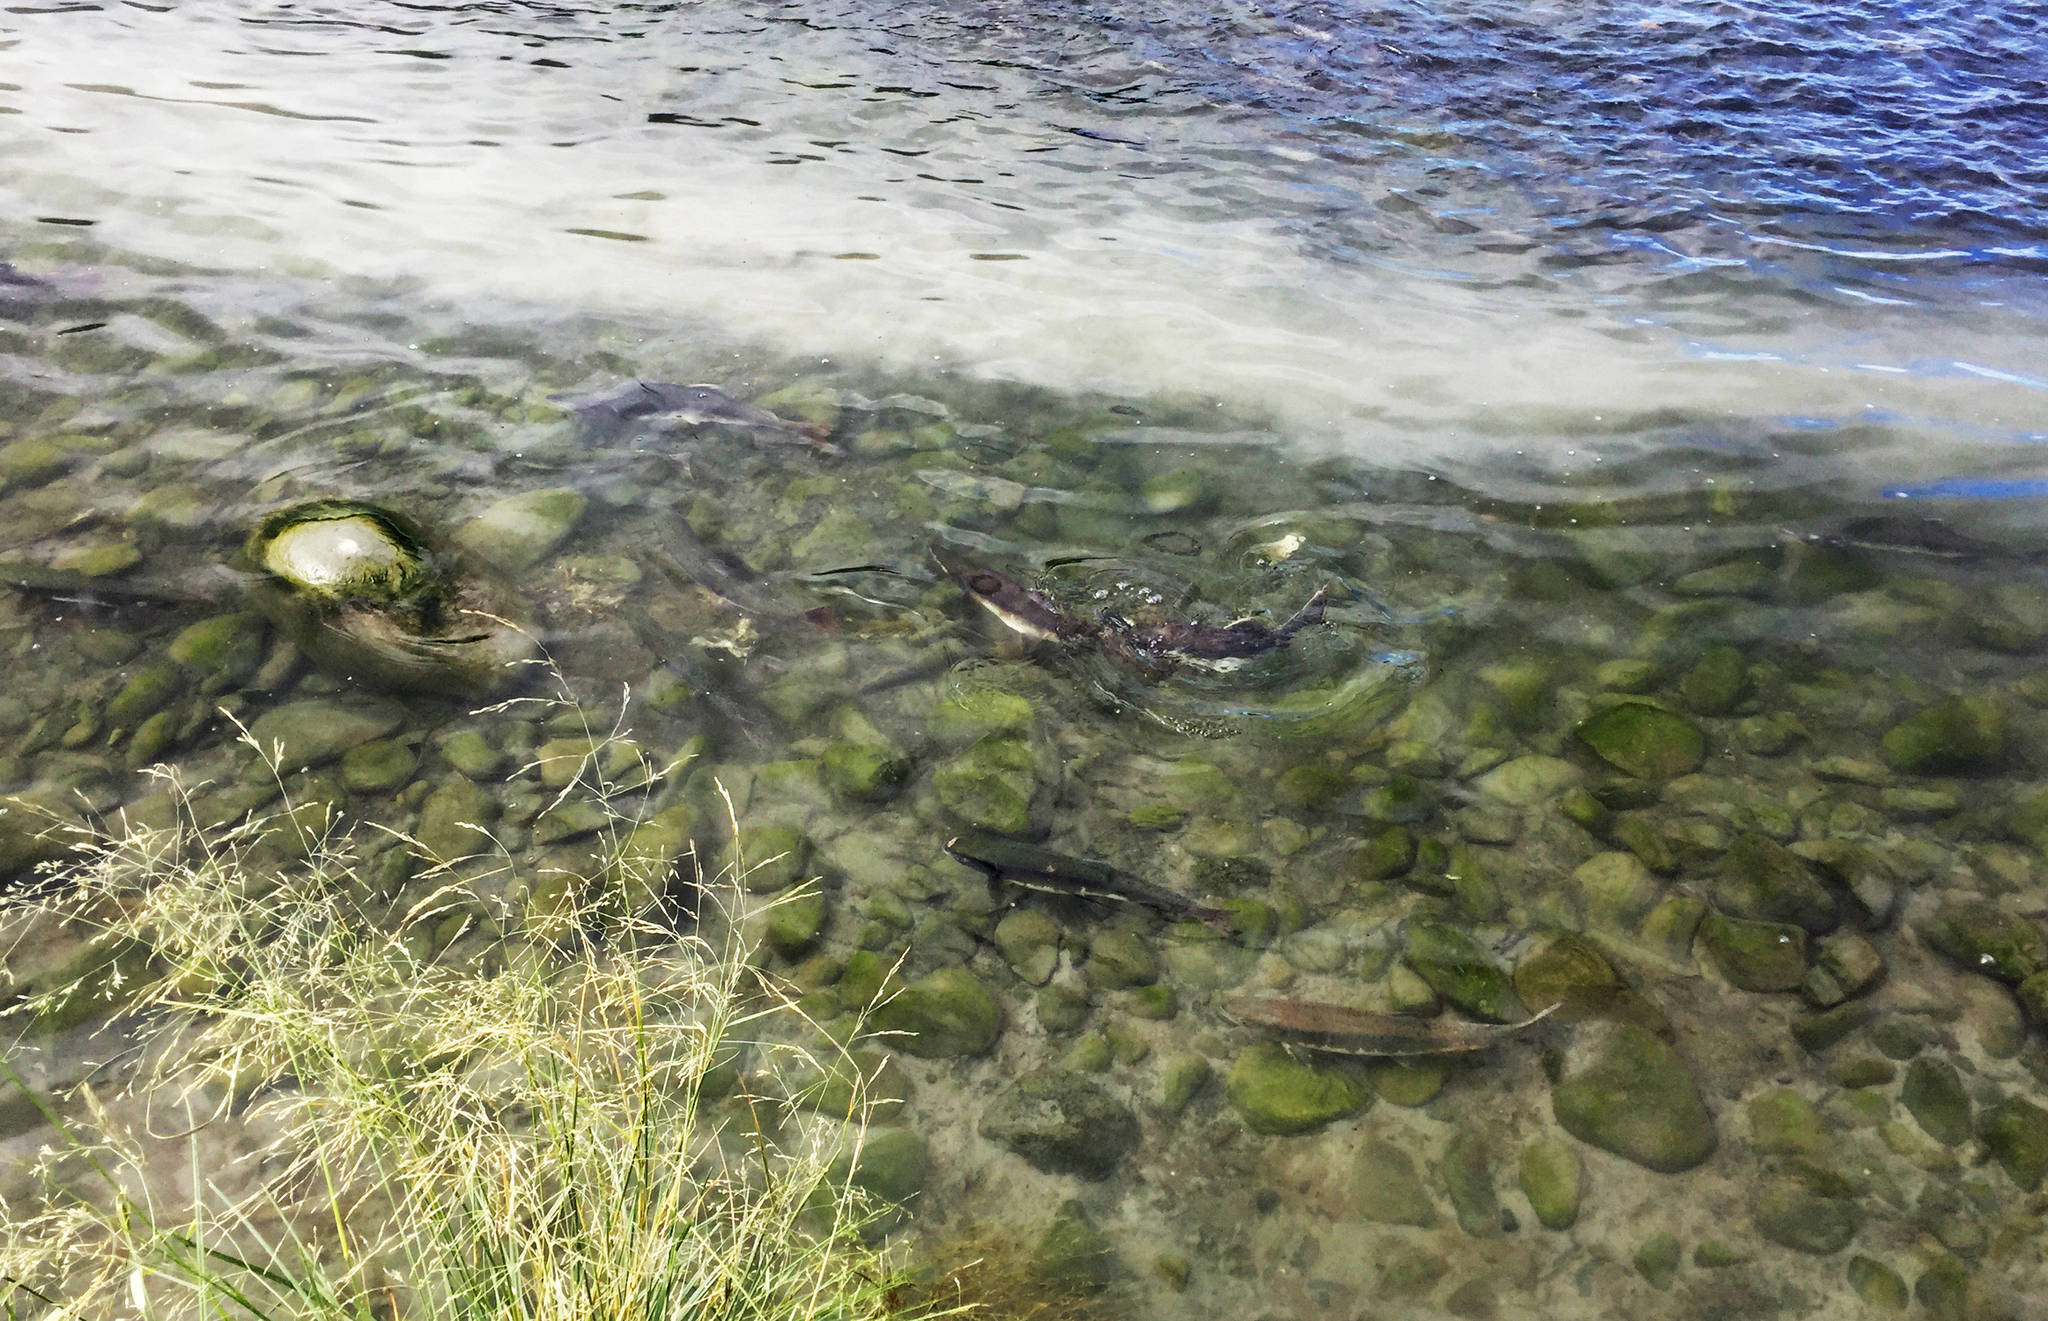 Pink salmon mill in the shallows of Resurrection Creek near its confluence with Cook Inlet on Sunday, Aug. 13, 2017 in Hope, Alaska. Pink salmon can return to the river in large numbers in the late summer and early fall. (Photo by Elizabeth Earl/Peninsula Clarion)